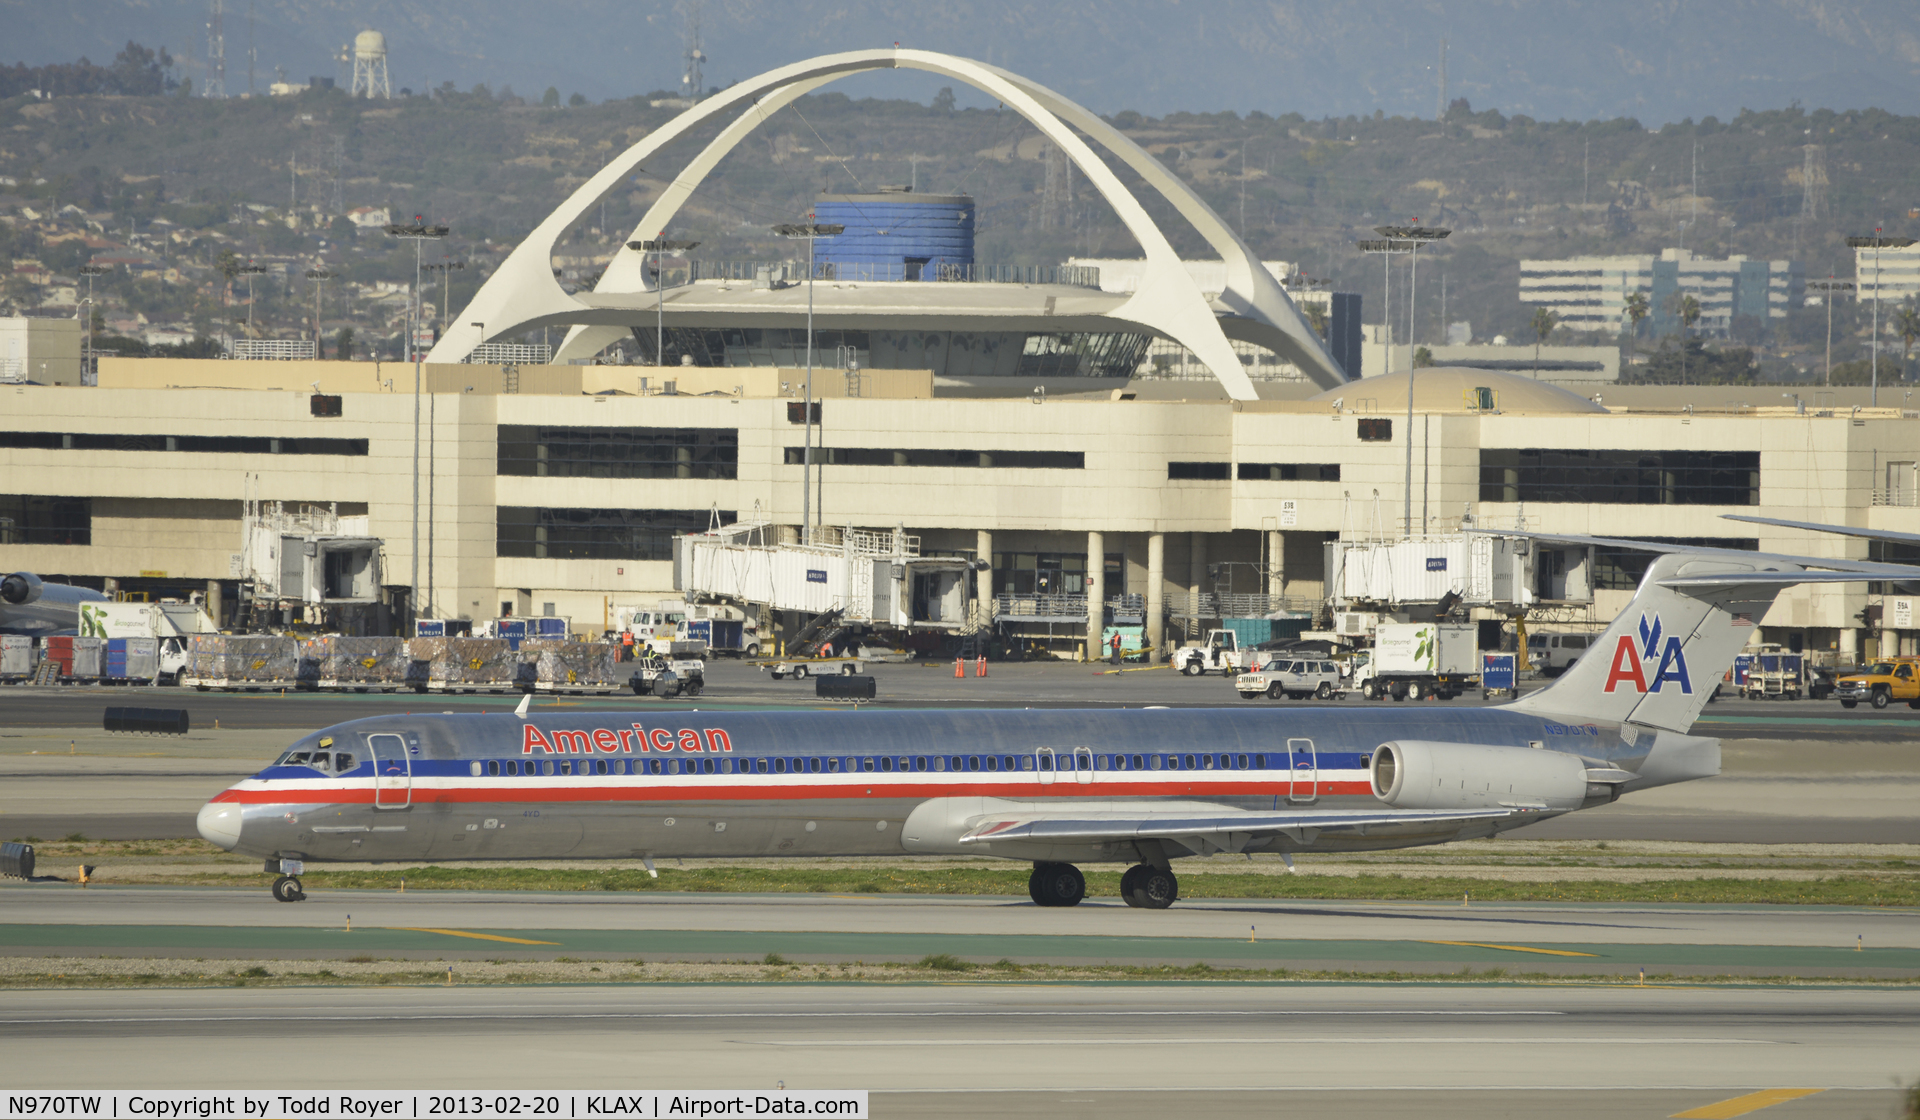 N970TW, 1999 McDonnell Douglas MD-83 (DC-9-83) C/N 53620, Arrived at LAX on 25L